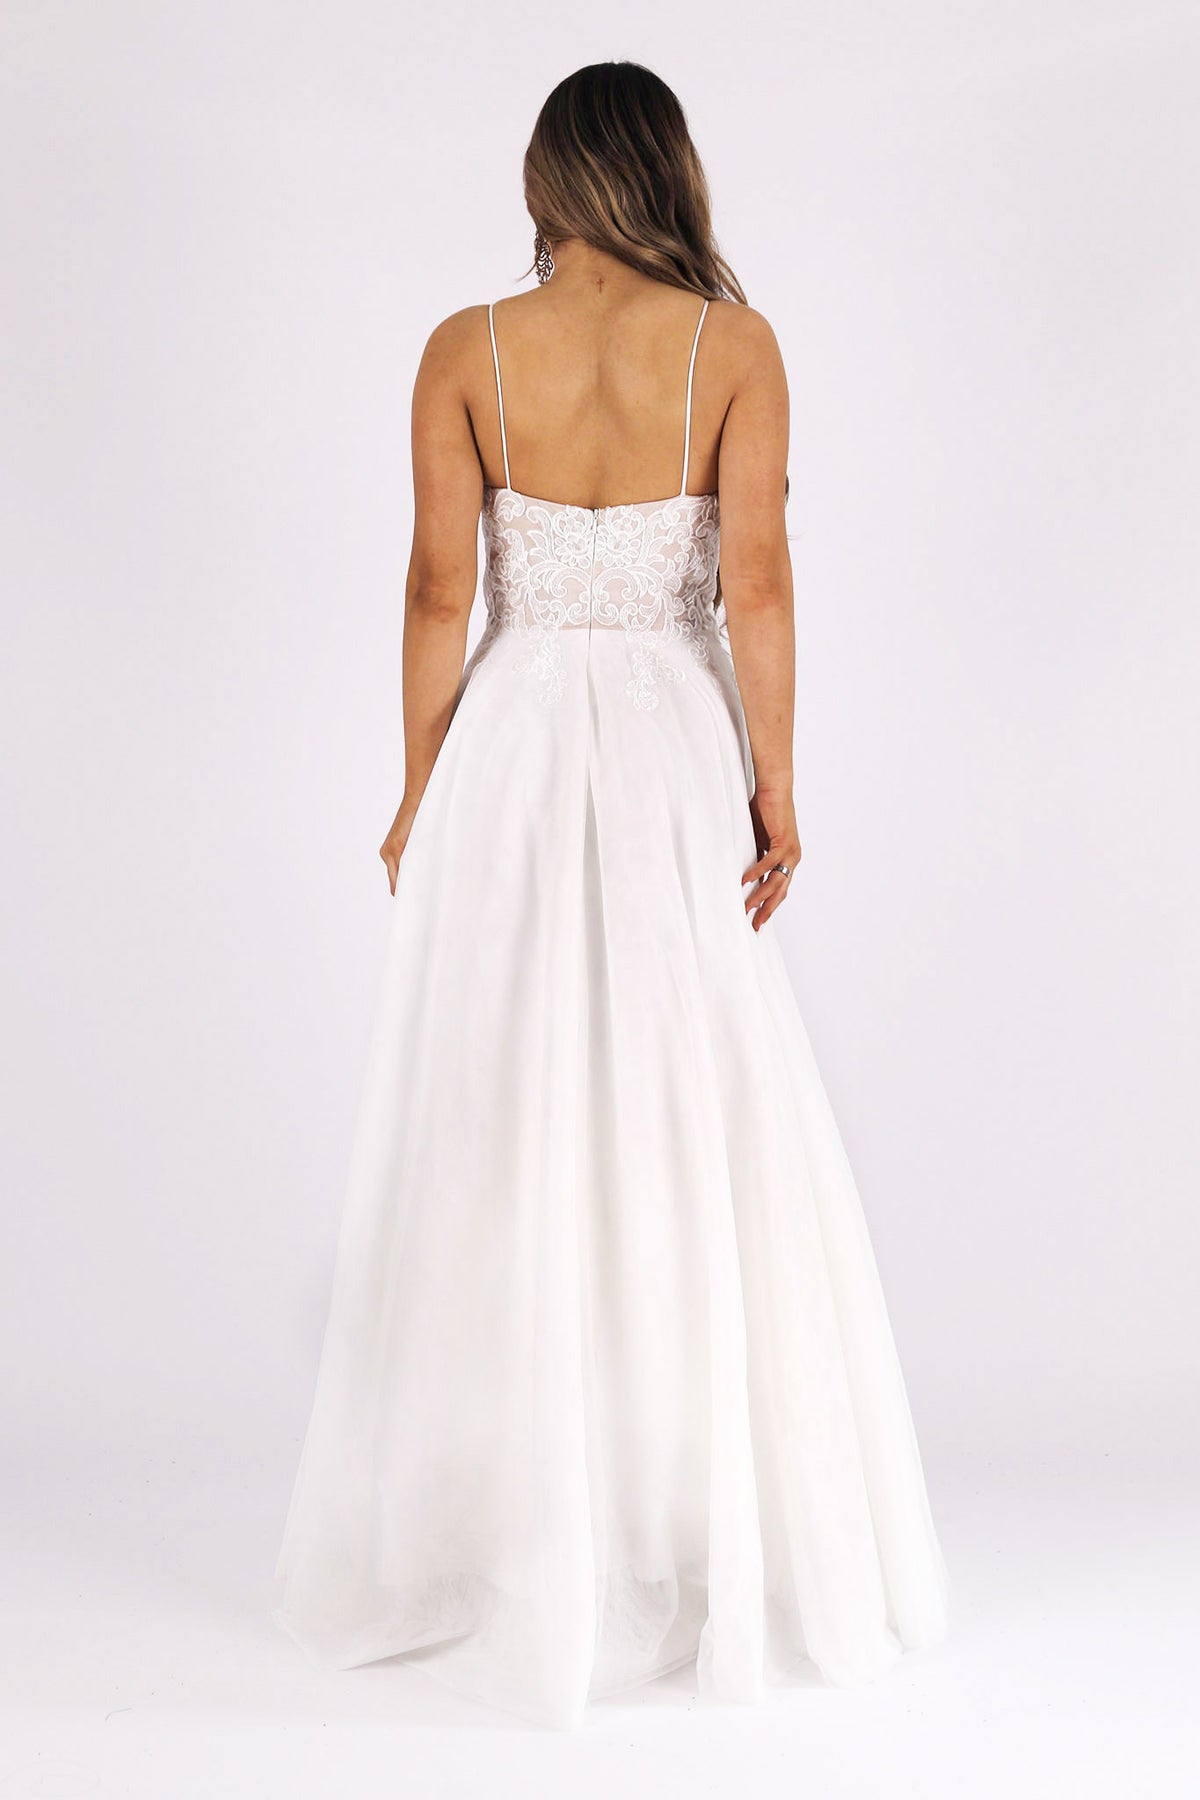 ANNIKA A-line Wedding Gown - White/Nude (S - Clearance Sale)